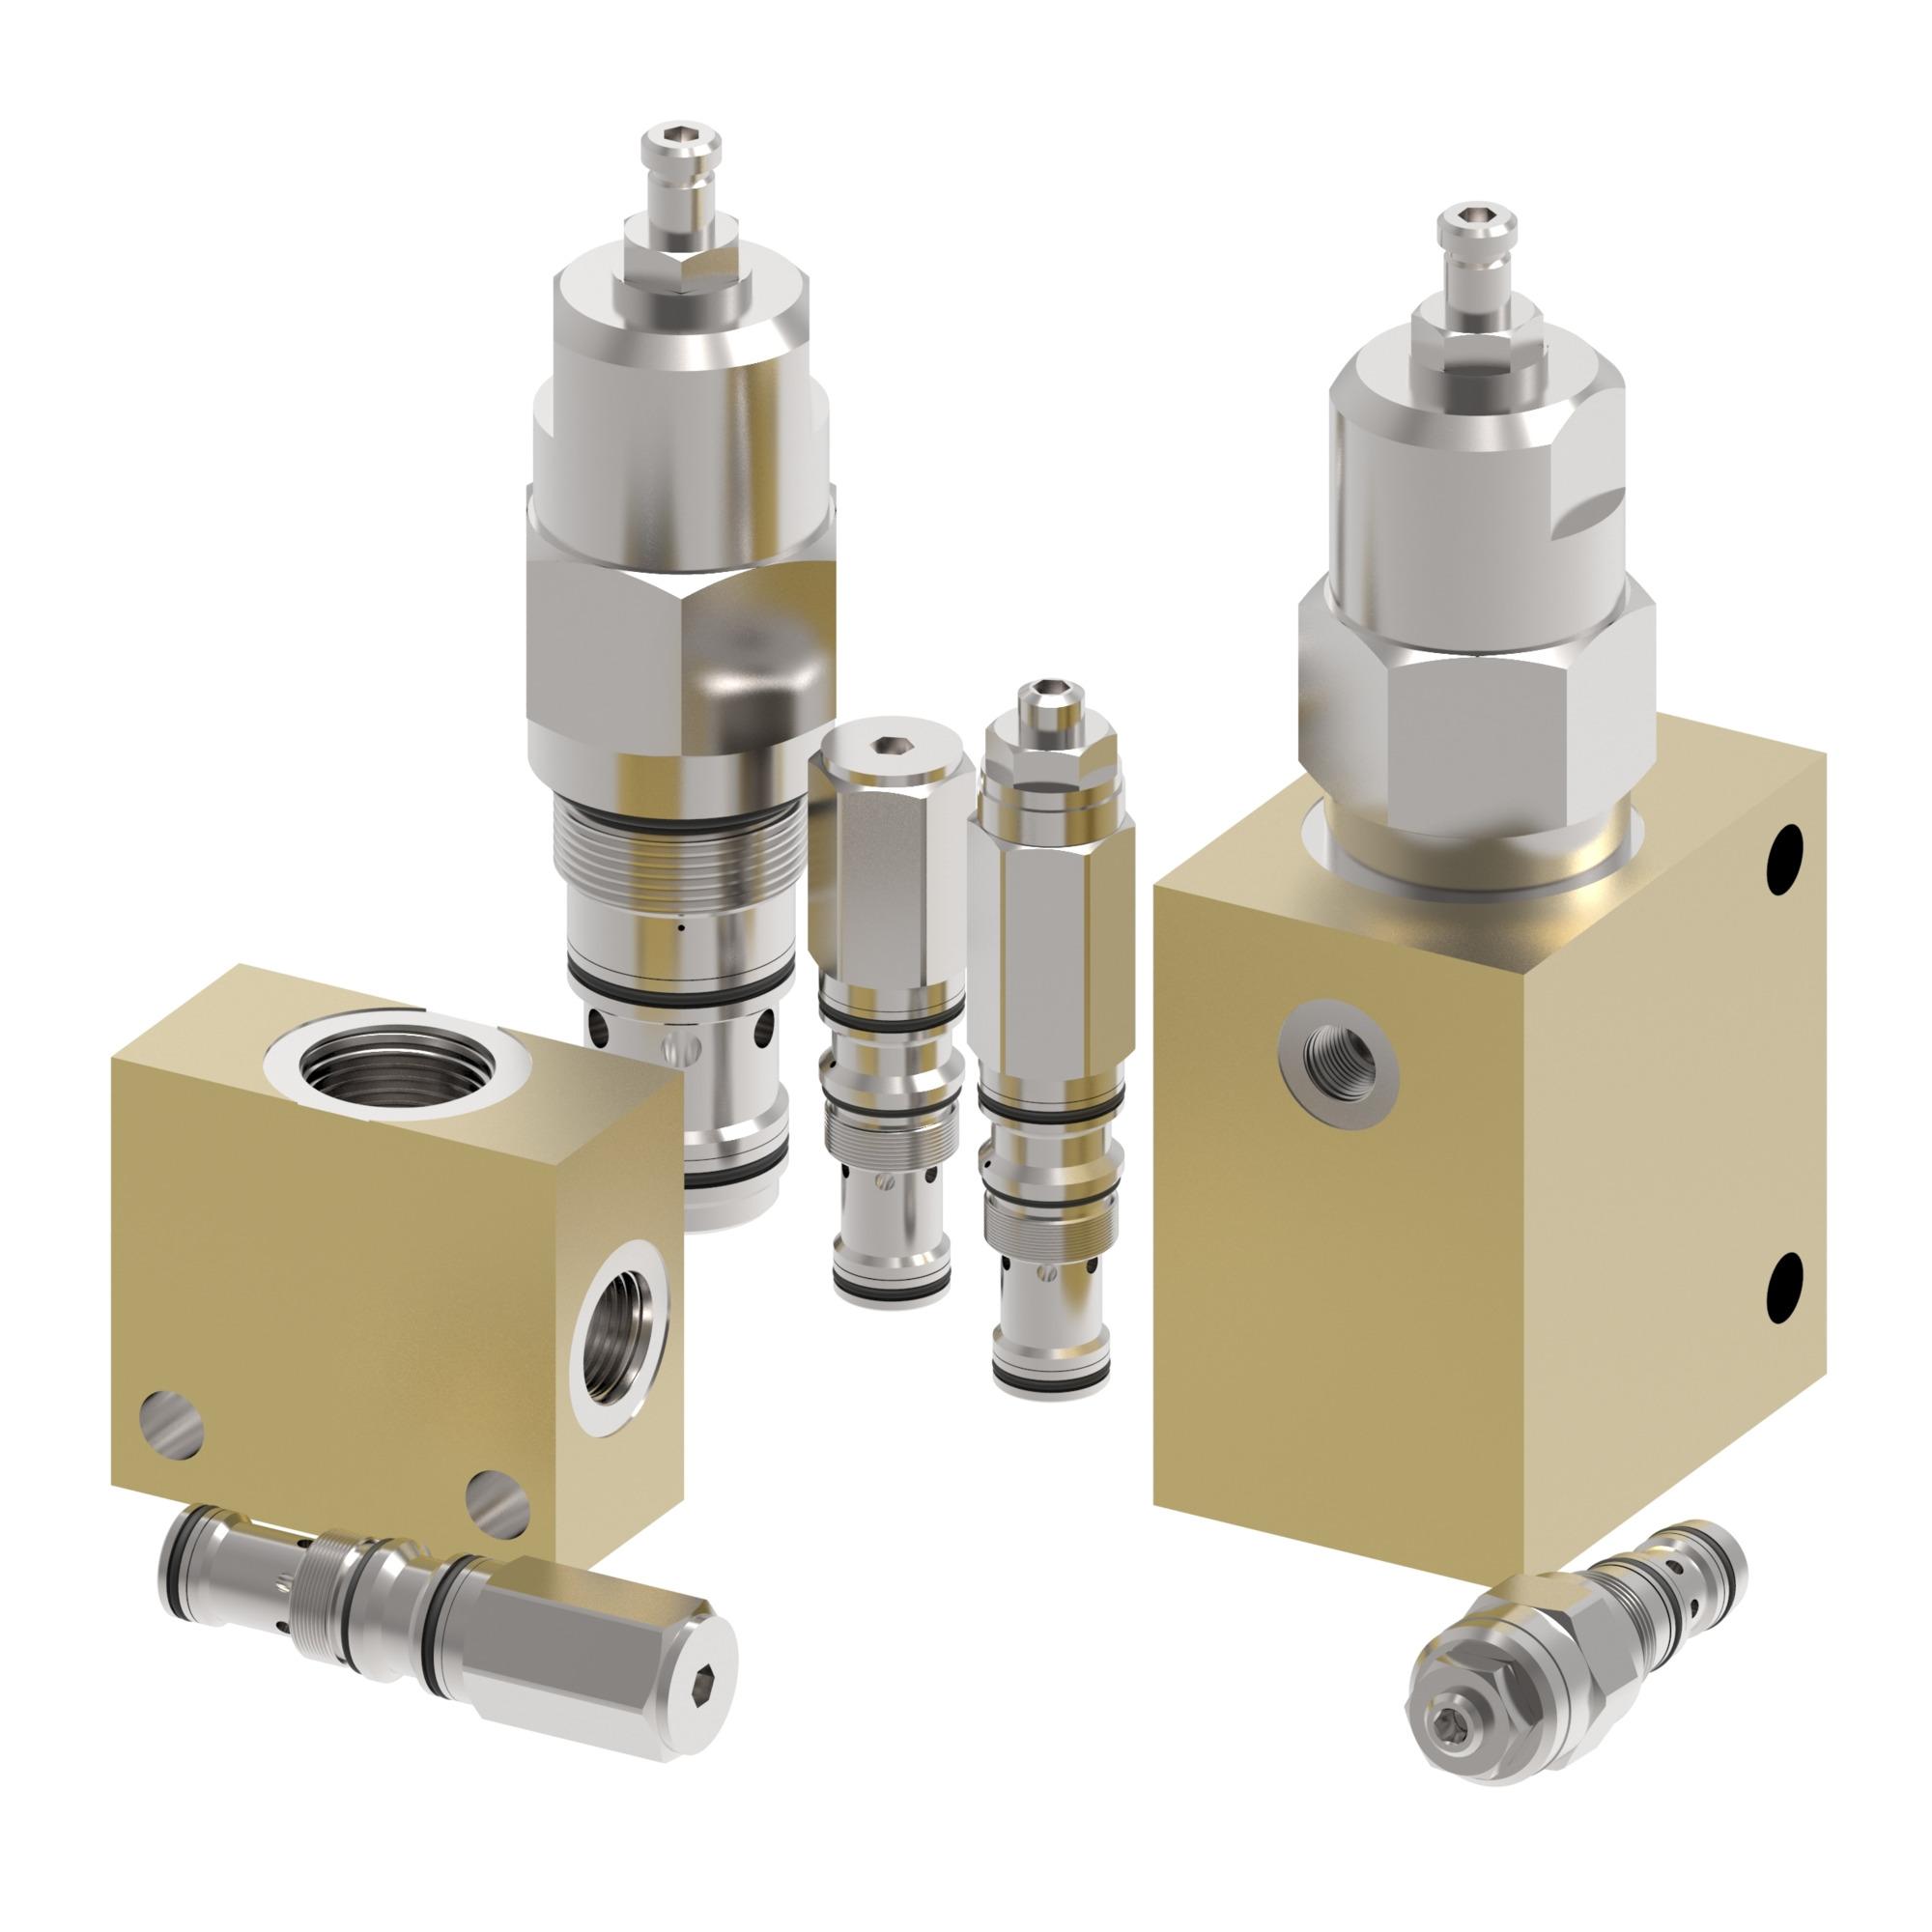 Motion control valves category image